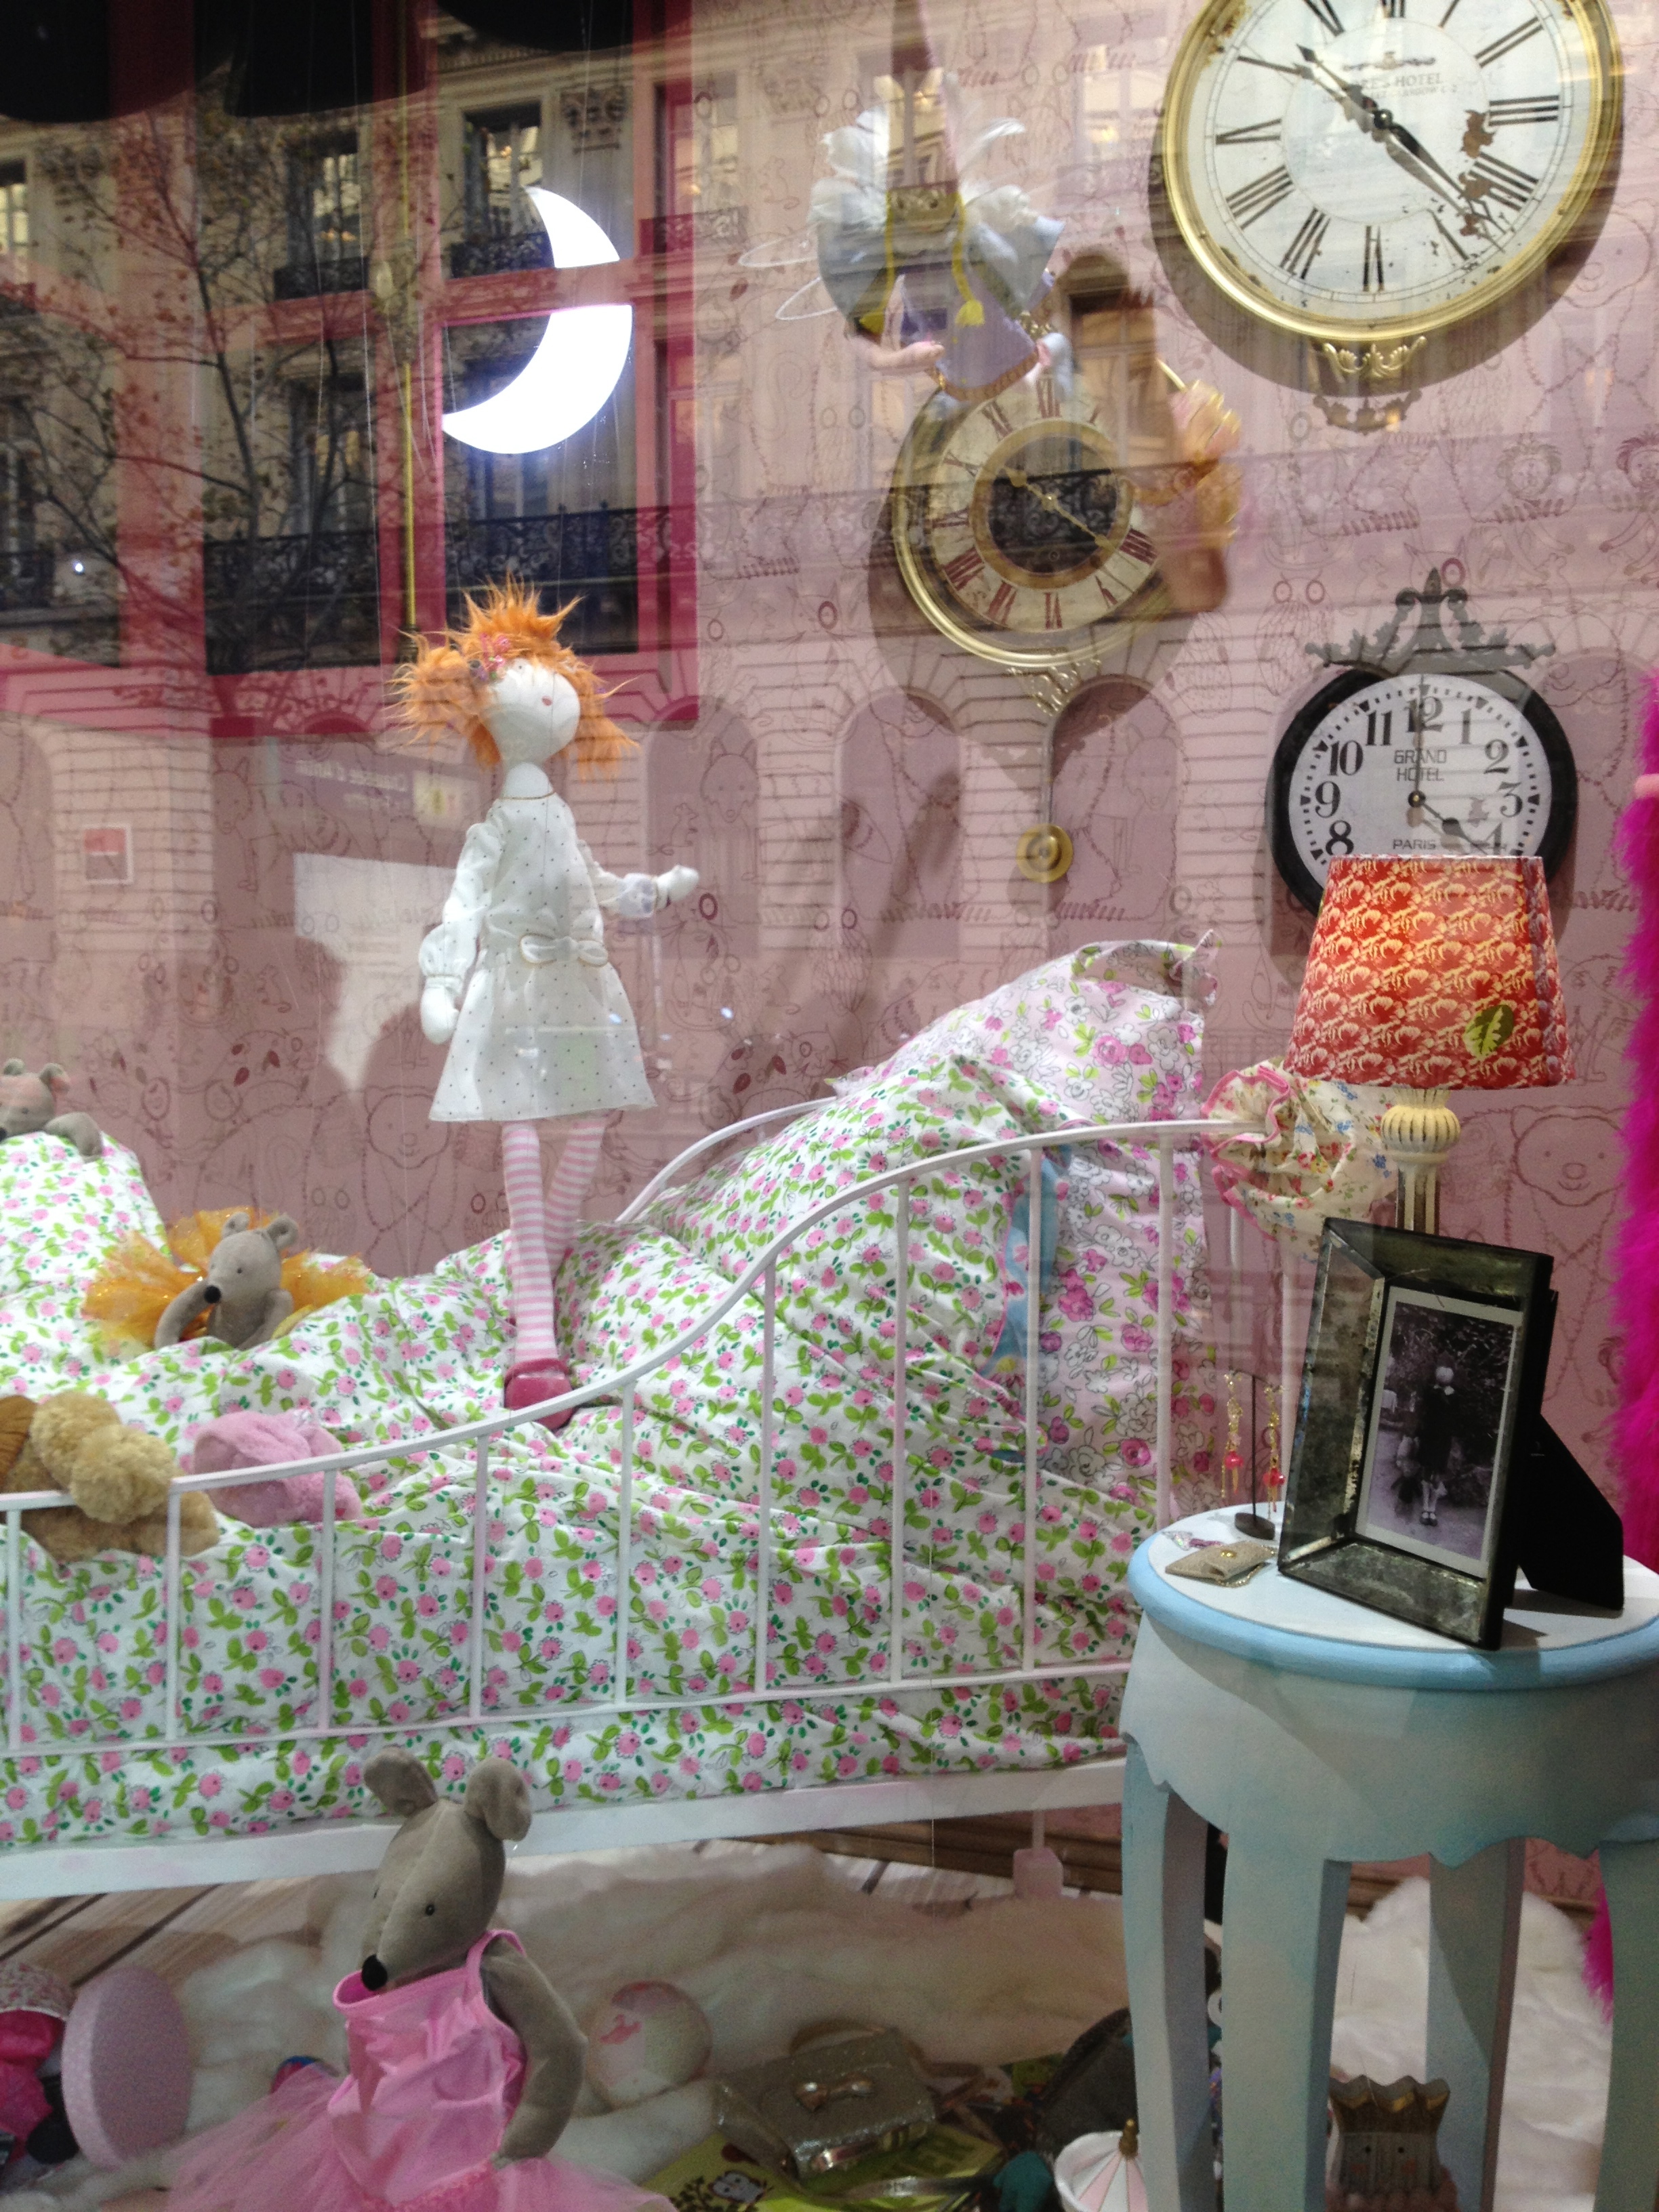  The window displays at Galeries Lafayette were just amazing. Each doll/soft toy was mechanically moving their limbs!&nbsp; 